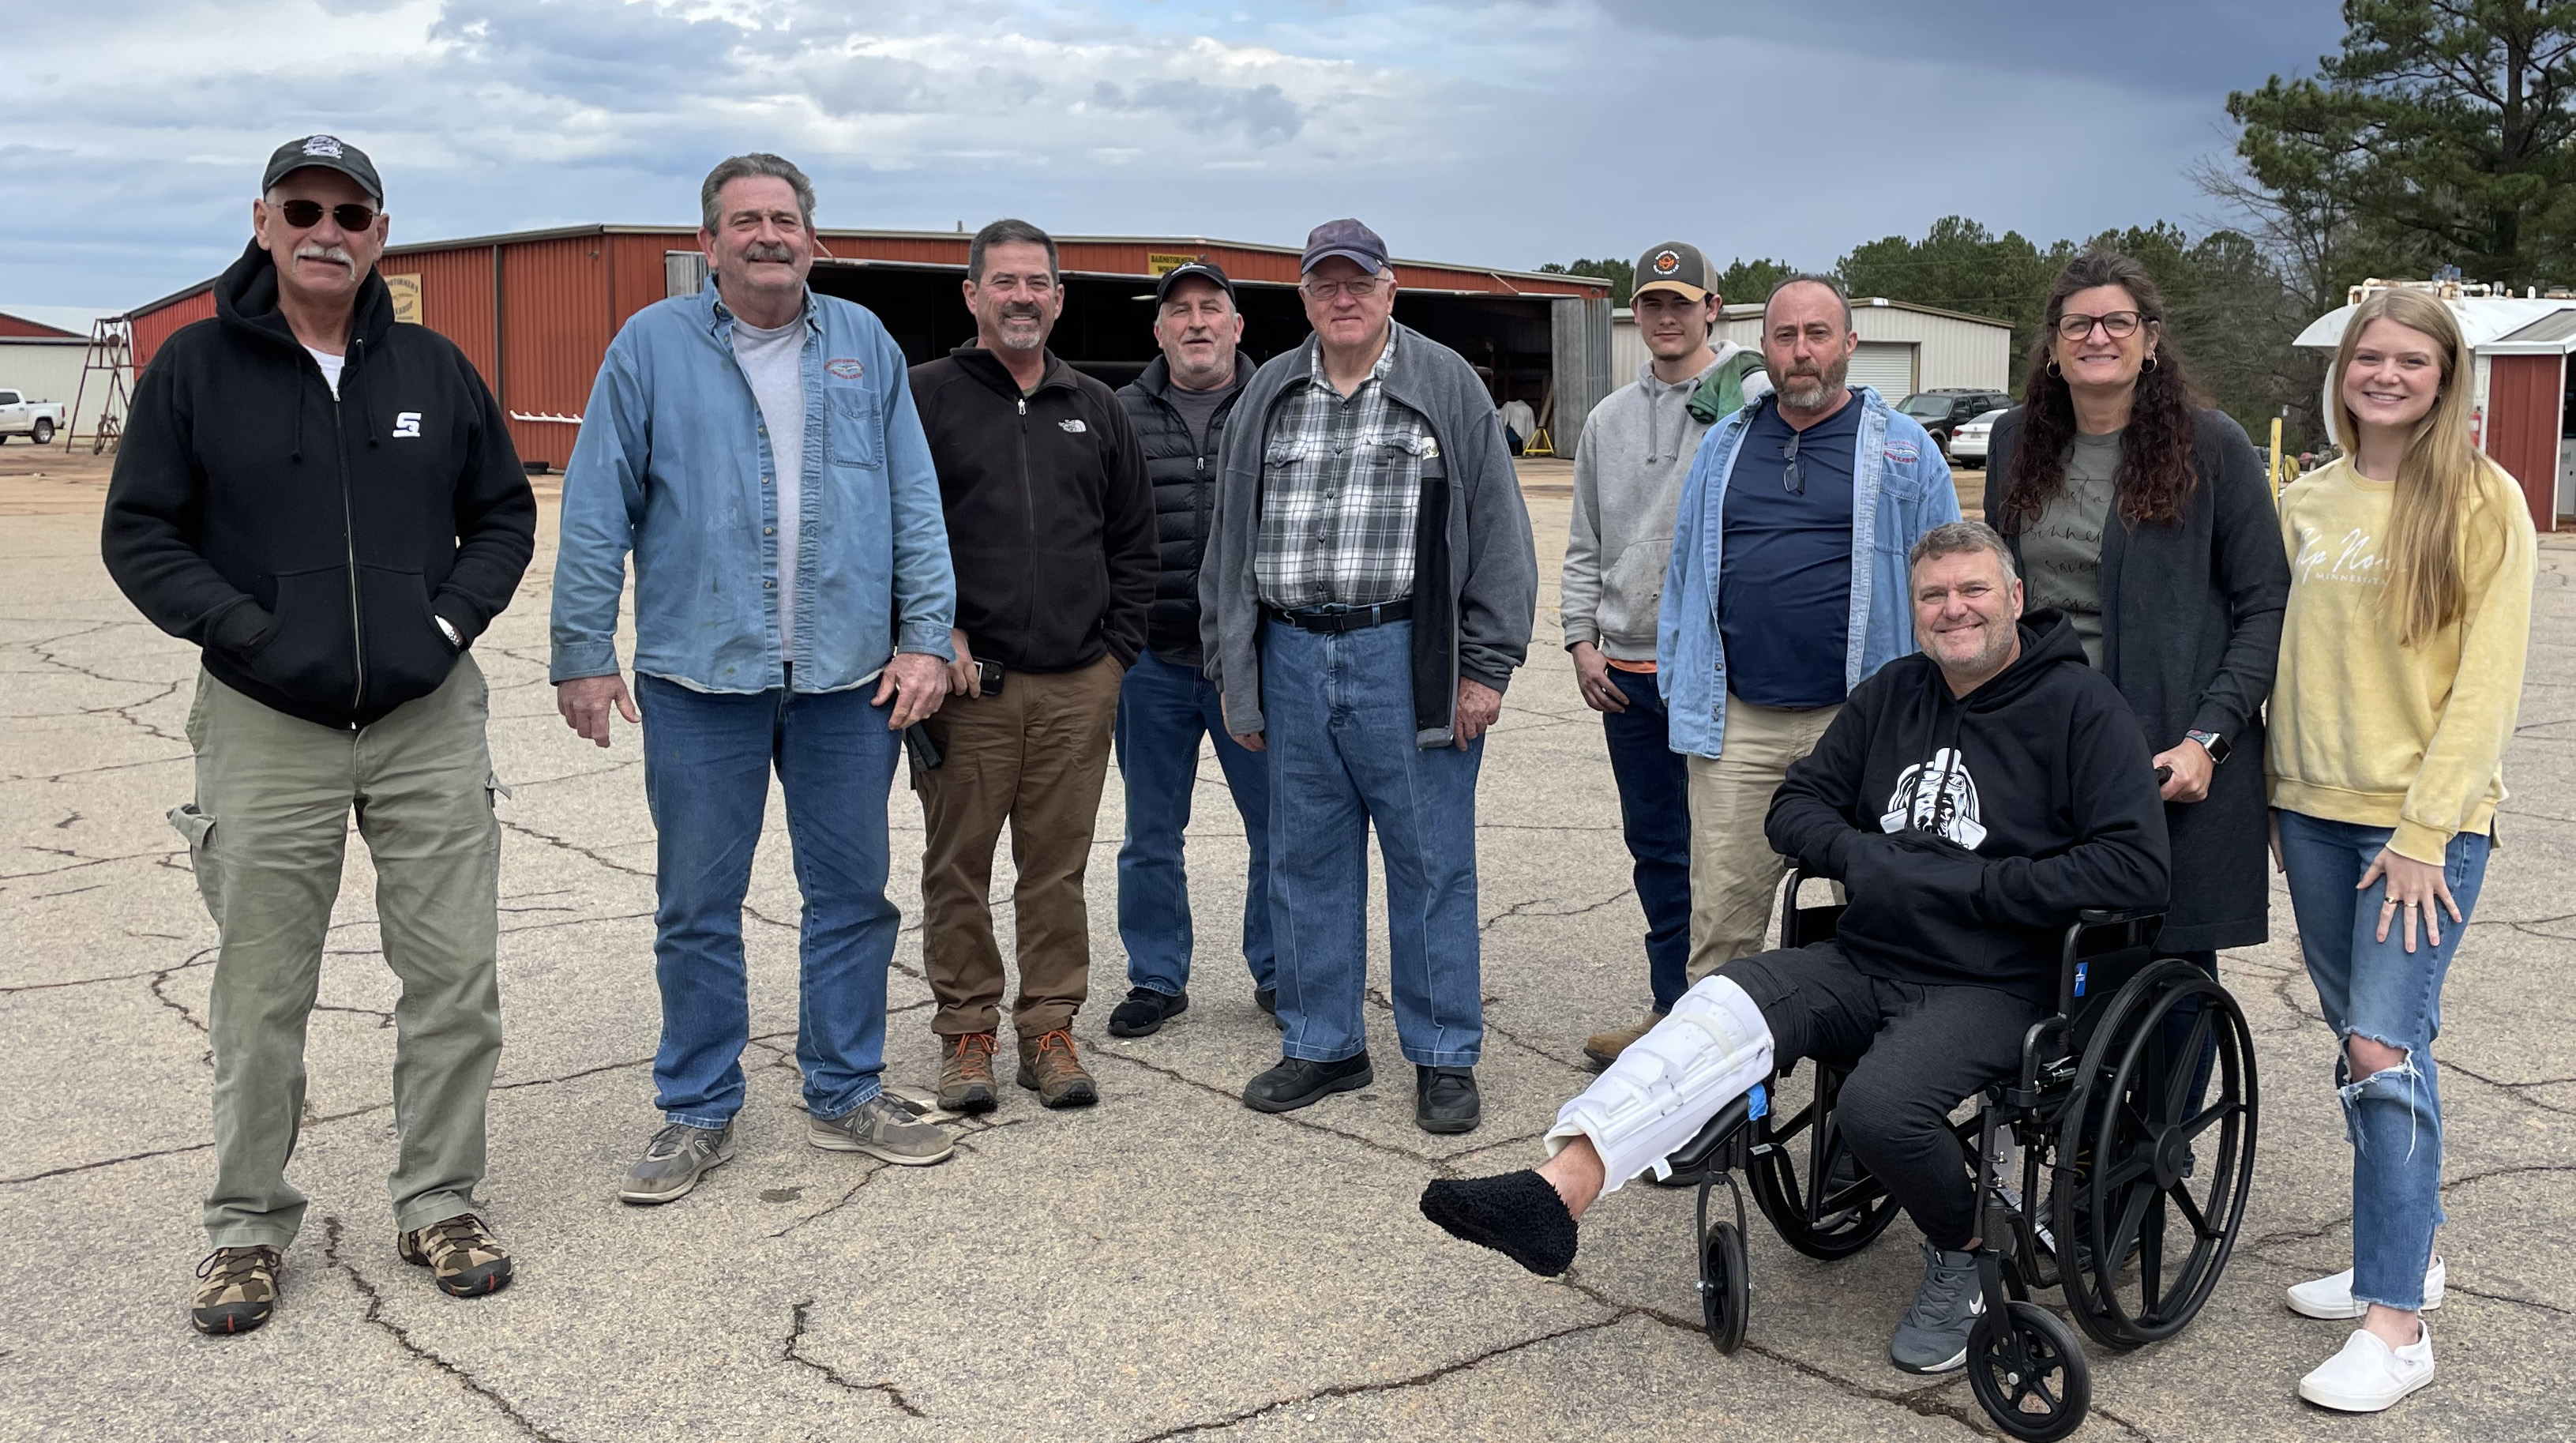 A small crowd gathered to cheer Parker Thaxton and Dave Stoots on as they completed the first post -maintenance flight of the AOPA Sweepstakes Cessna 170B. Photo by Cayla McLeod Hunt.